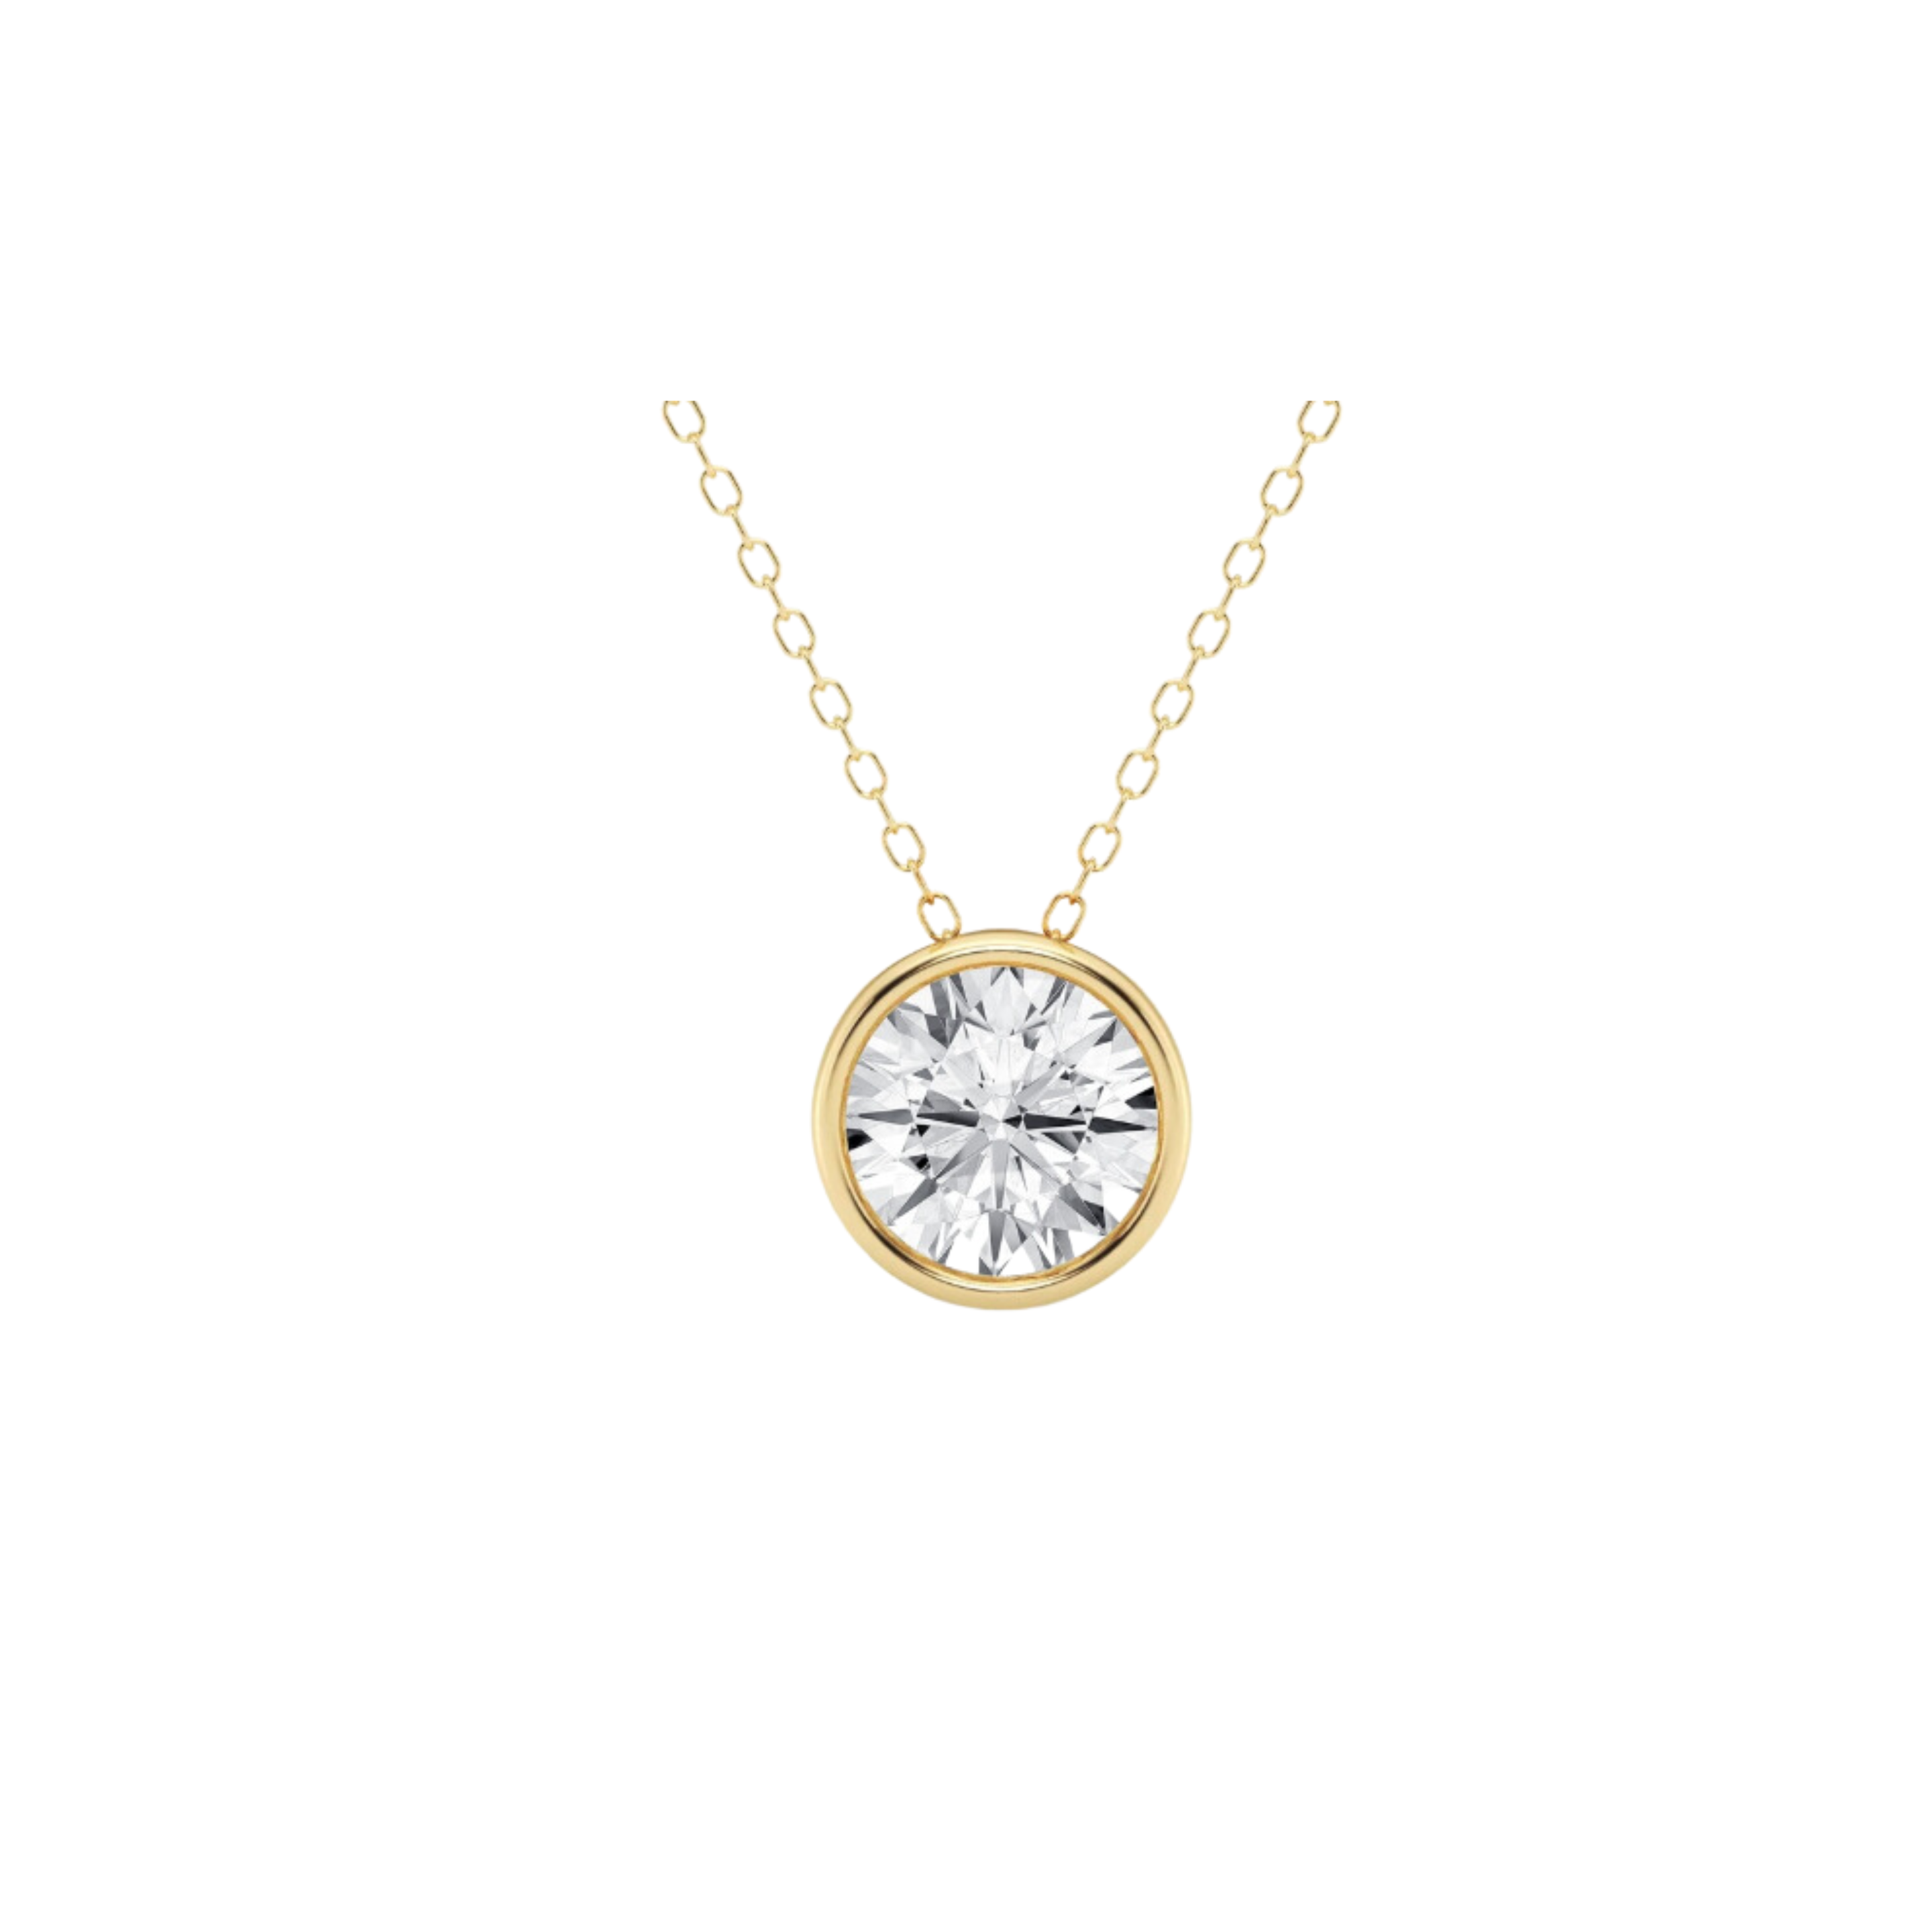 The Classic Bezel Necklace Mounting